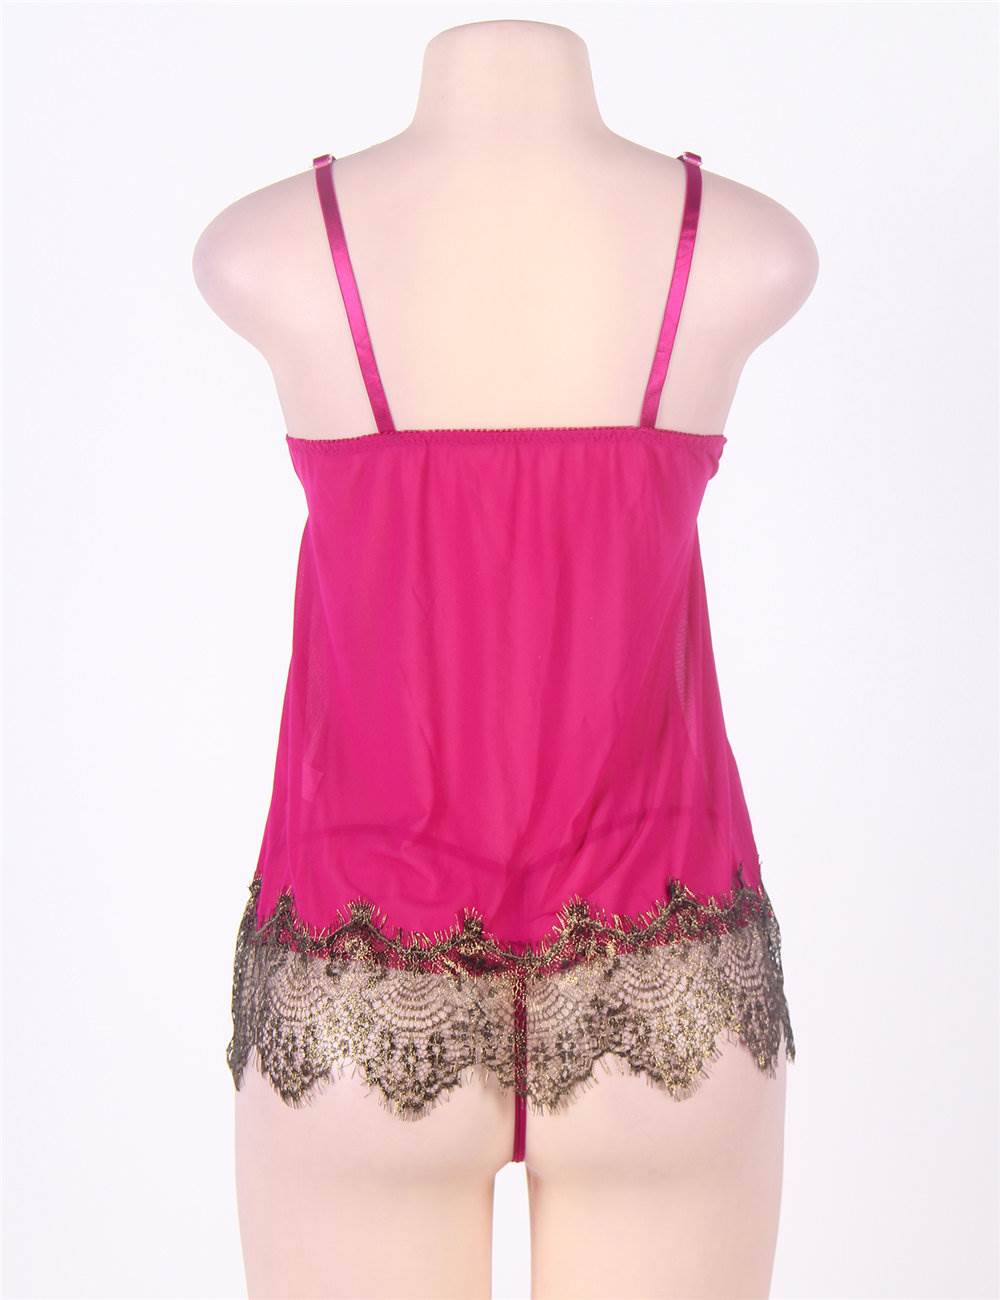 Fashion Hot Regal Romance Sexy Rose Red Lace Babydoll